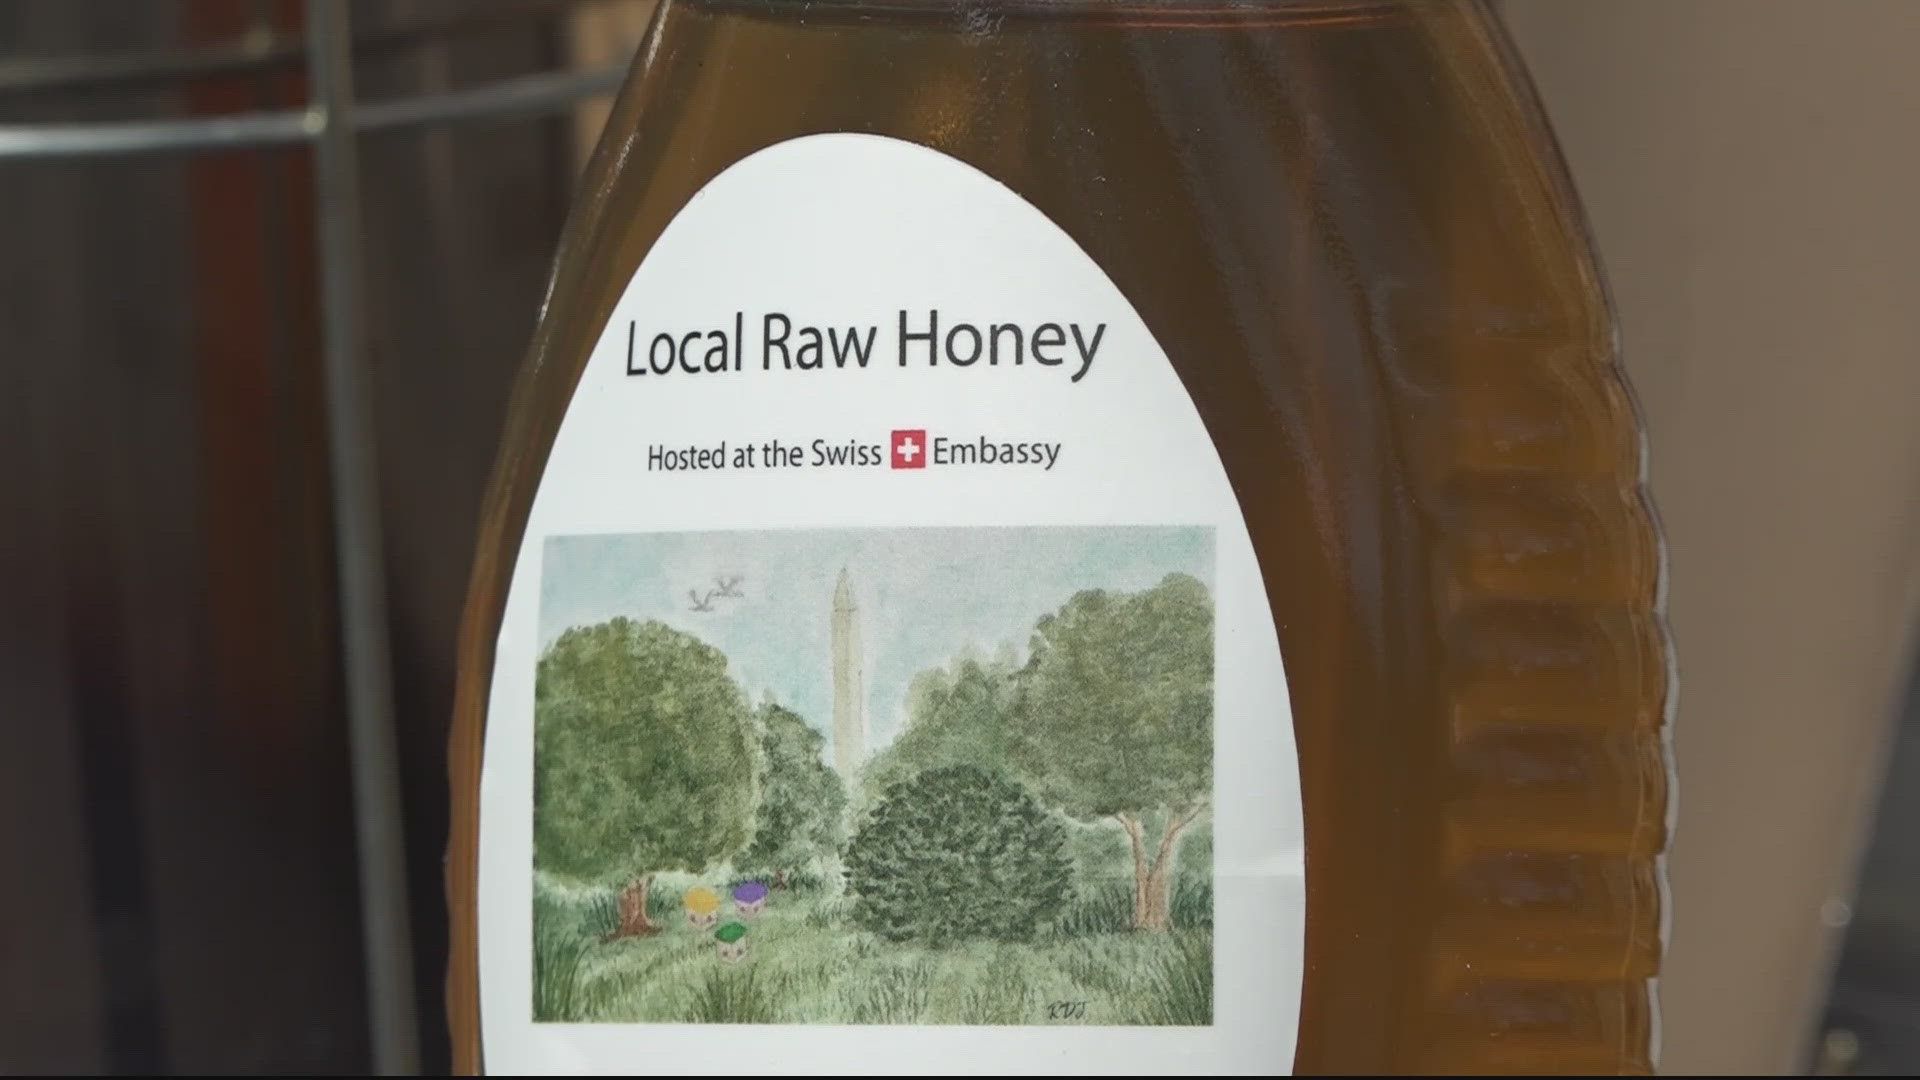 Experts say there is no evidence local honey prevents spring allergies.